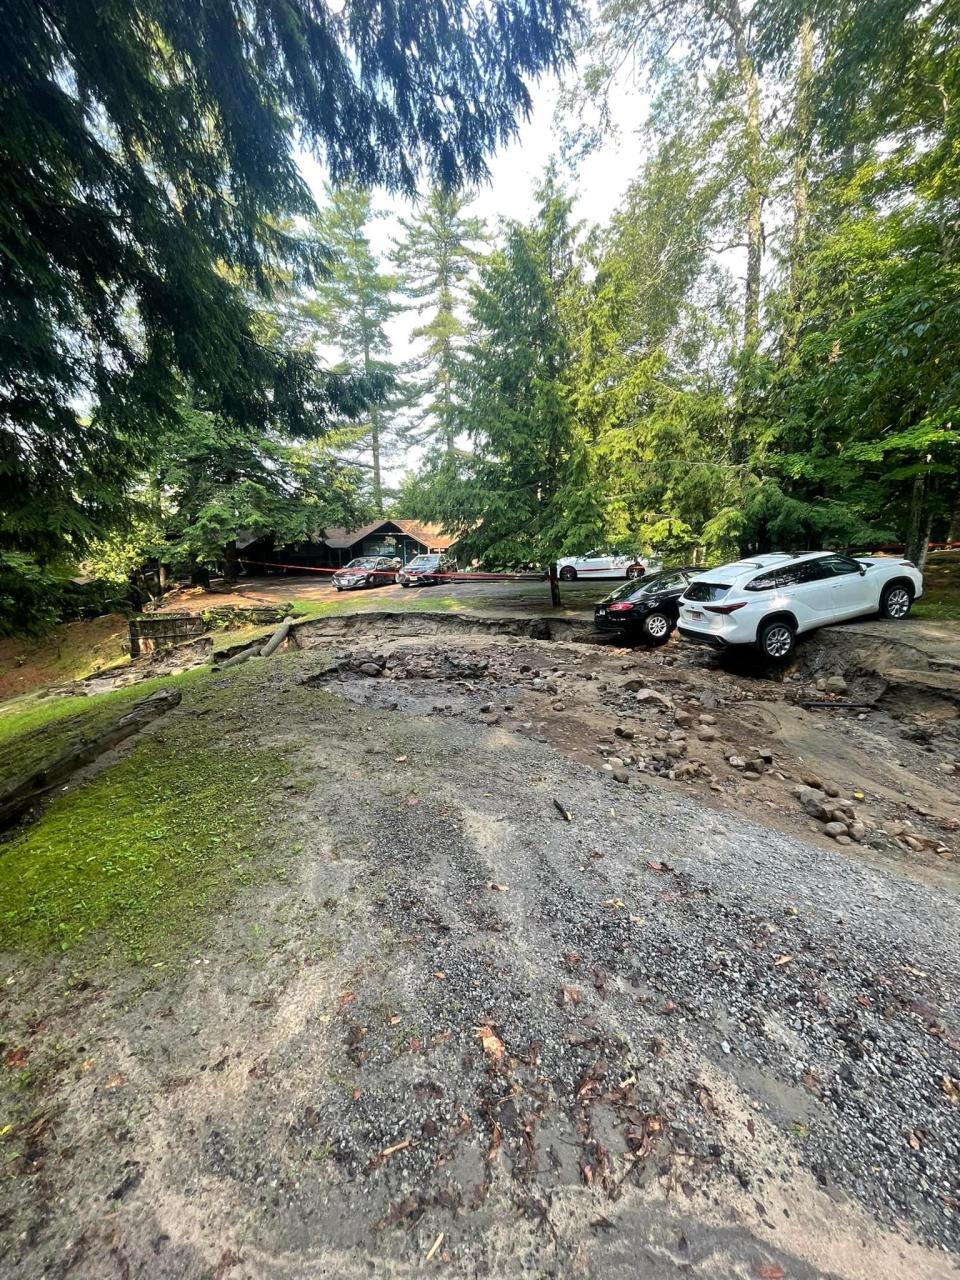 A car leans off a cliff of dirt from a washed out parking area.